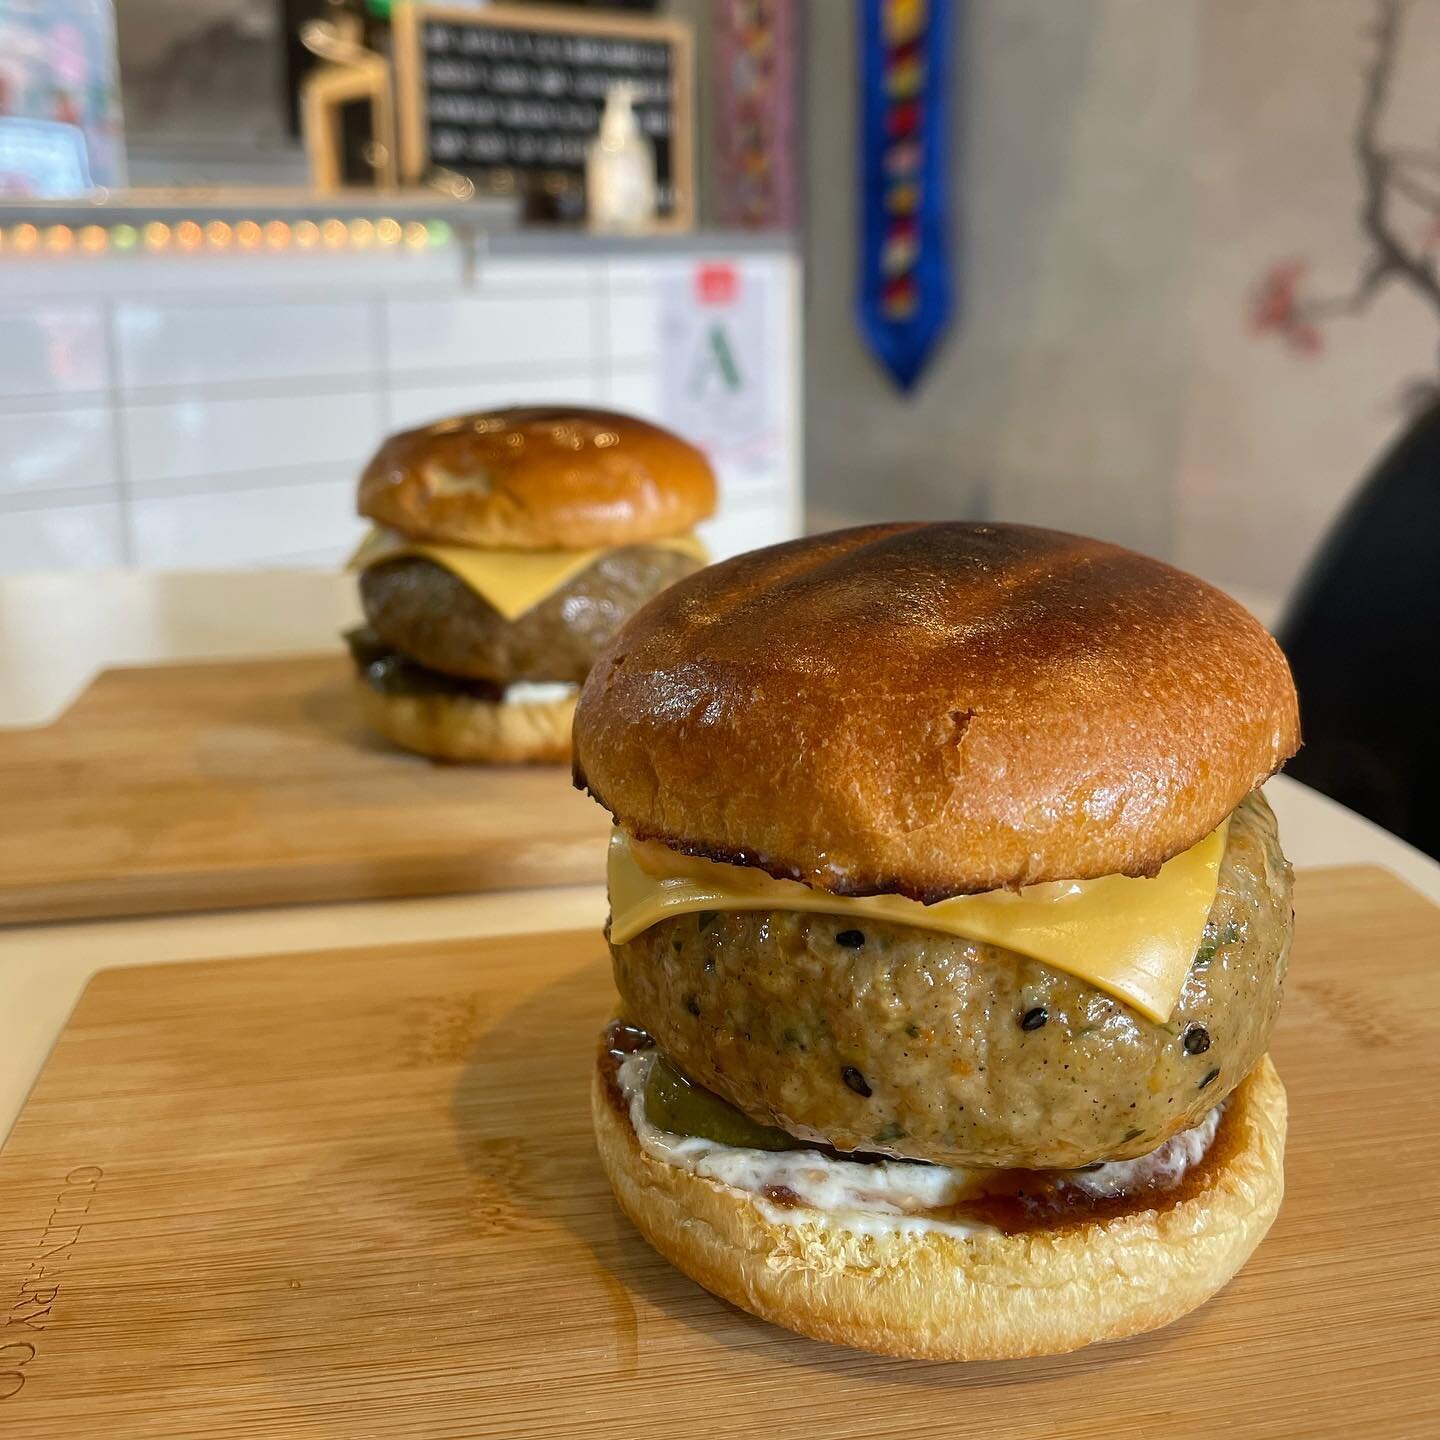 Easily one of the best burgers we have indulged in&hellip; and trust us, we&rsquo;ve had a lot of burgers&hellip;!!!

Khris opened @meet_balls_nz this year and the food is DELICIOUS! Everything is made from scratch including all sauces and condiments